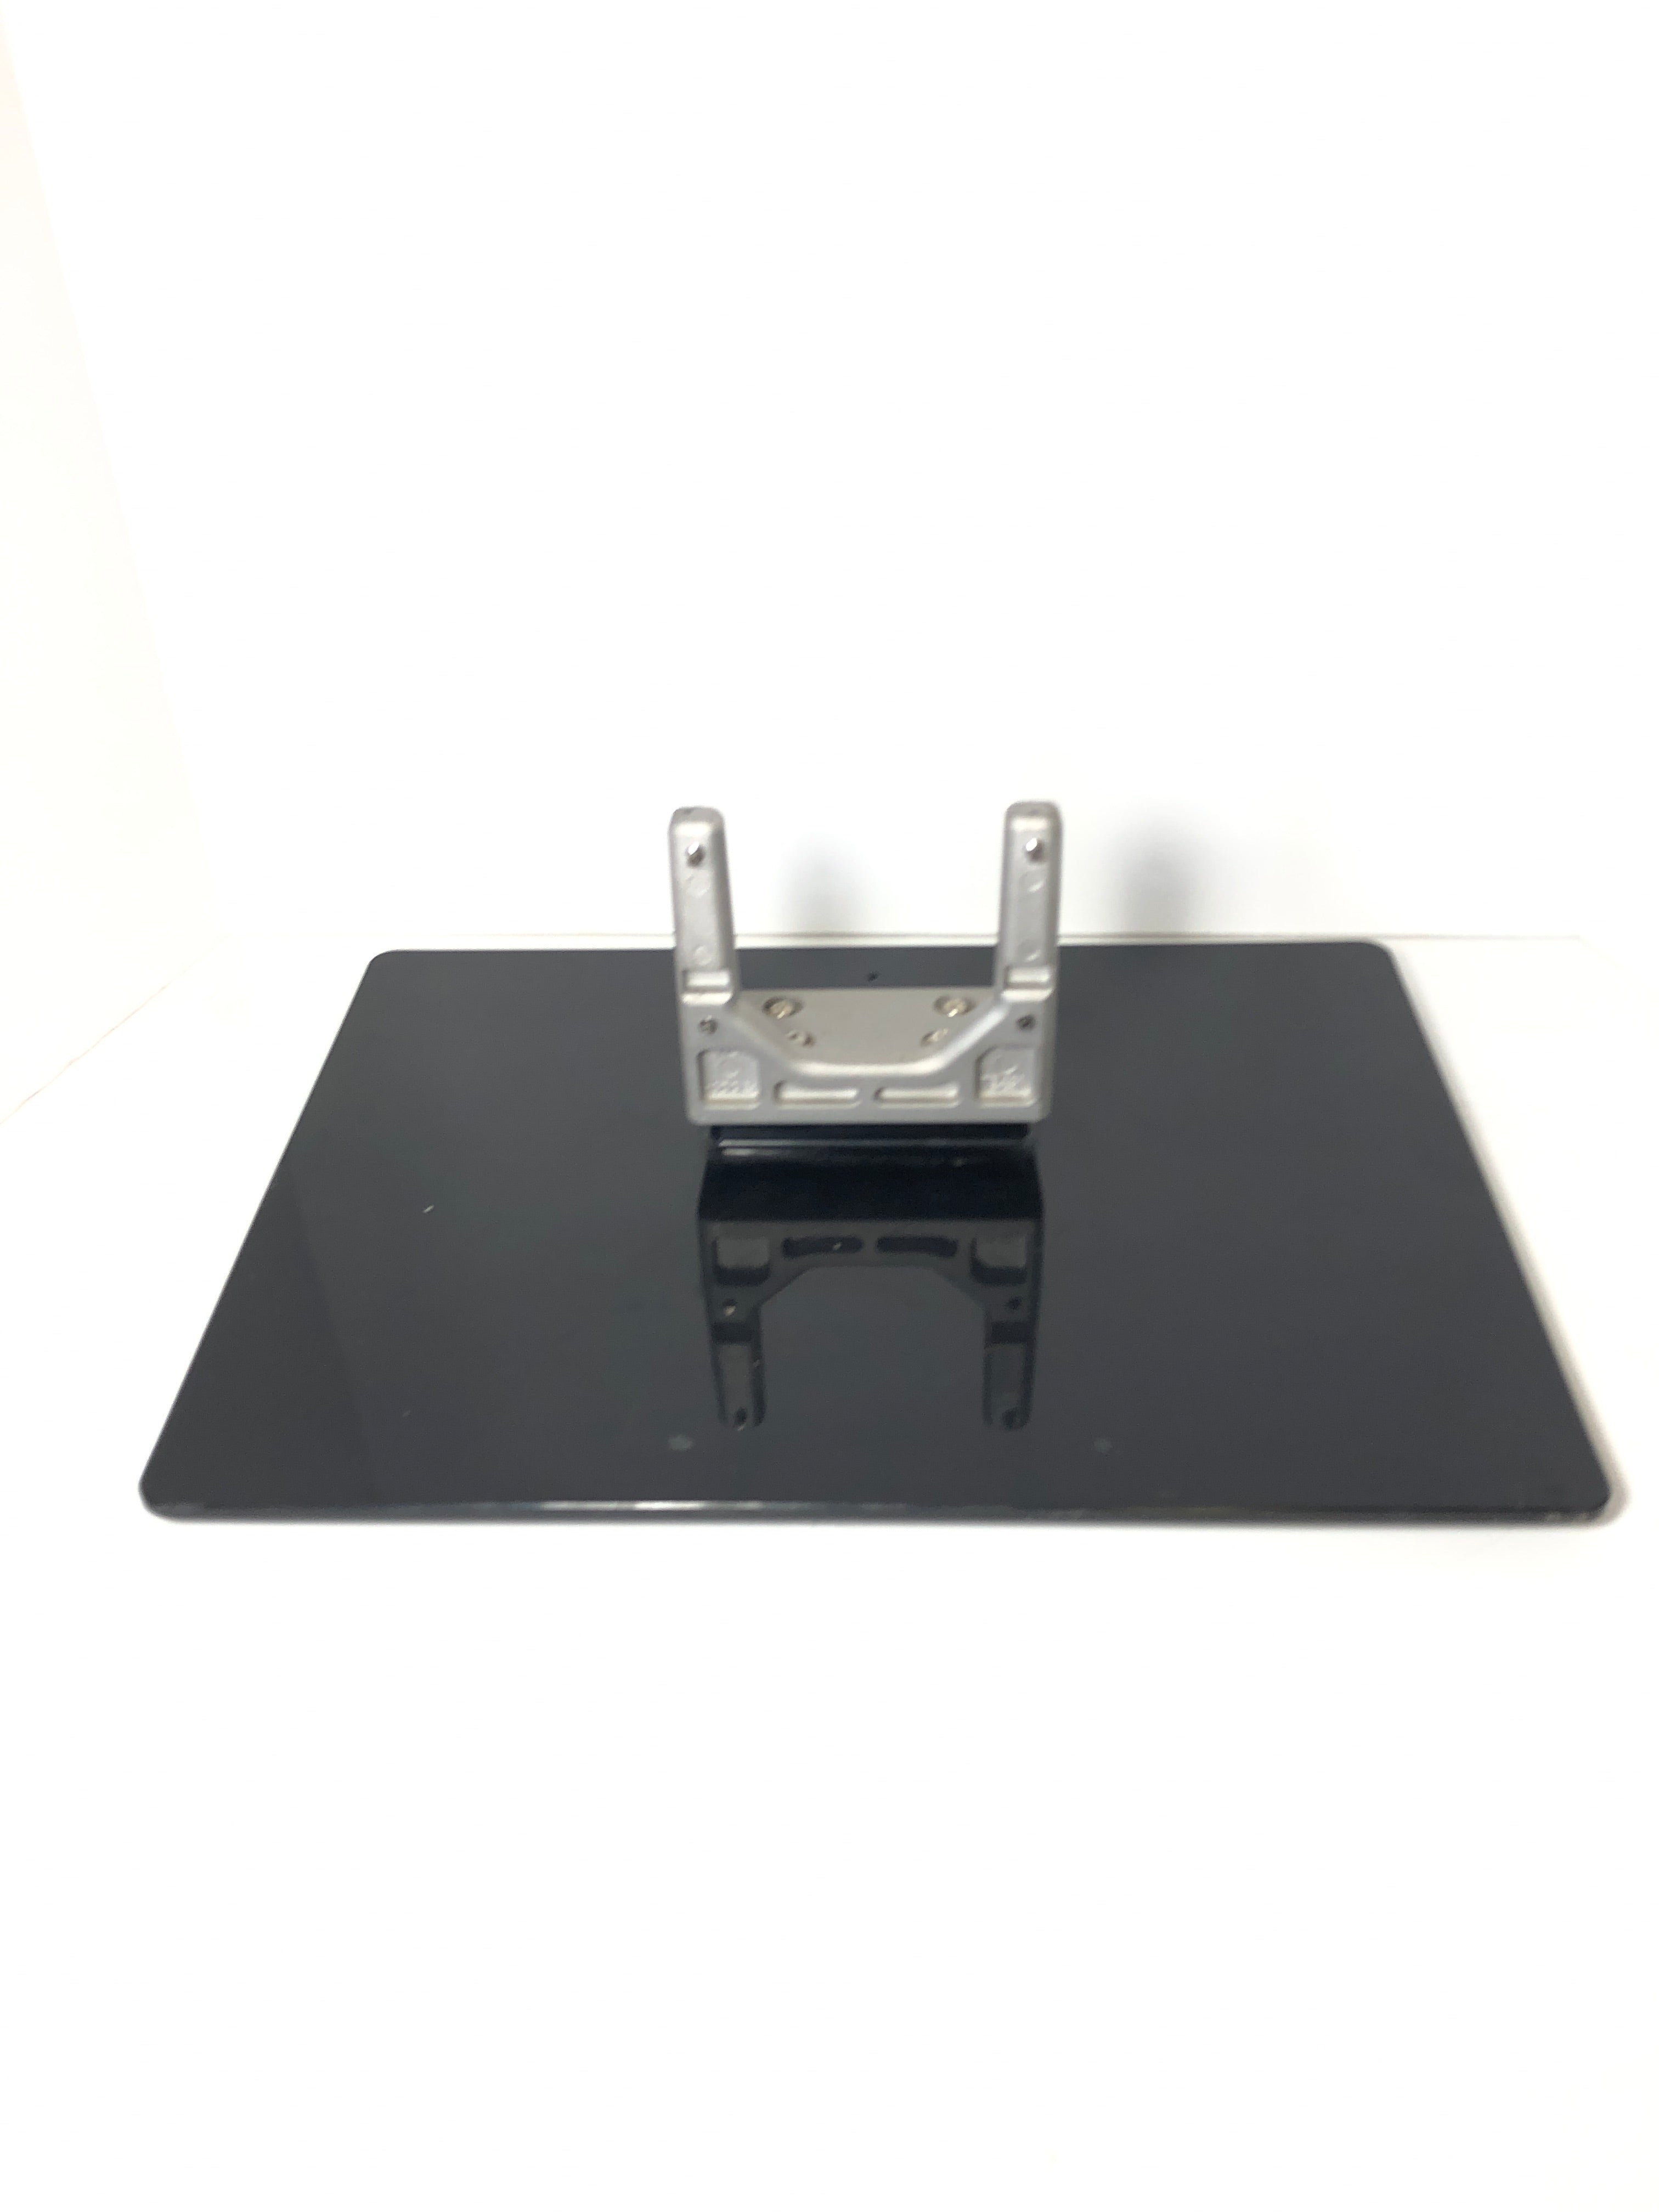 Panasonic TBL5ZX0029 Stand/Base for TC-P42S30